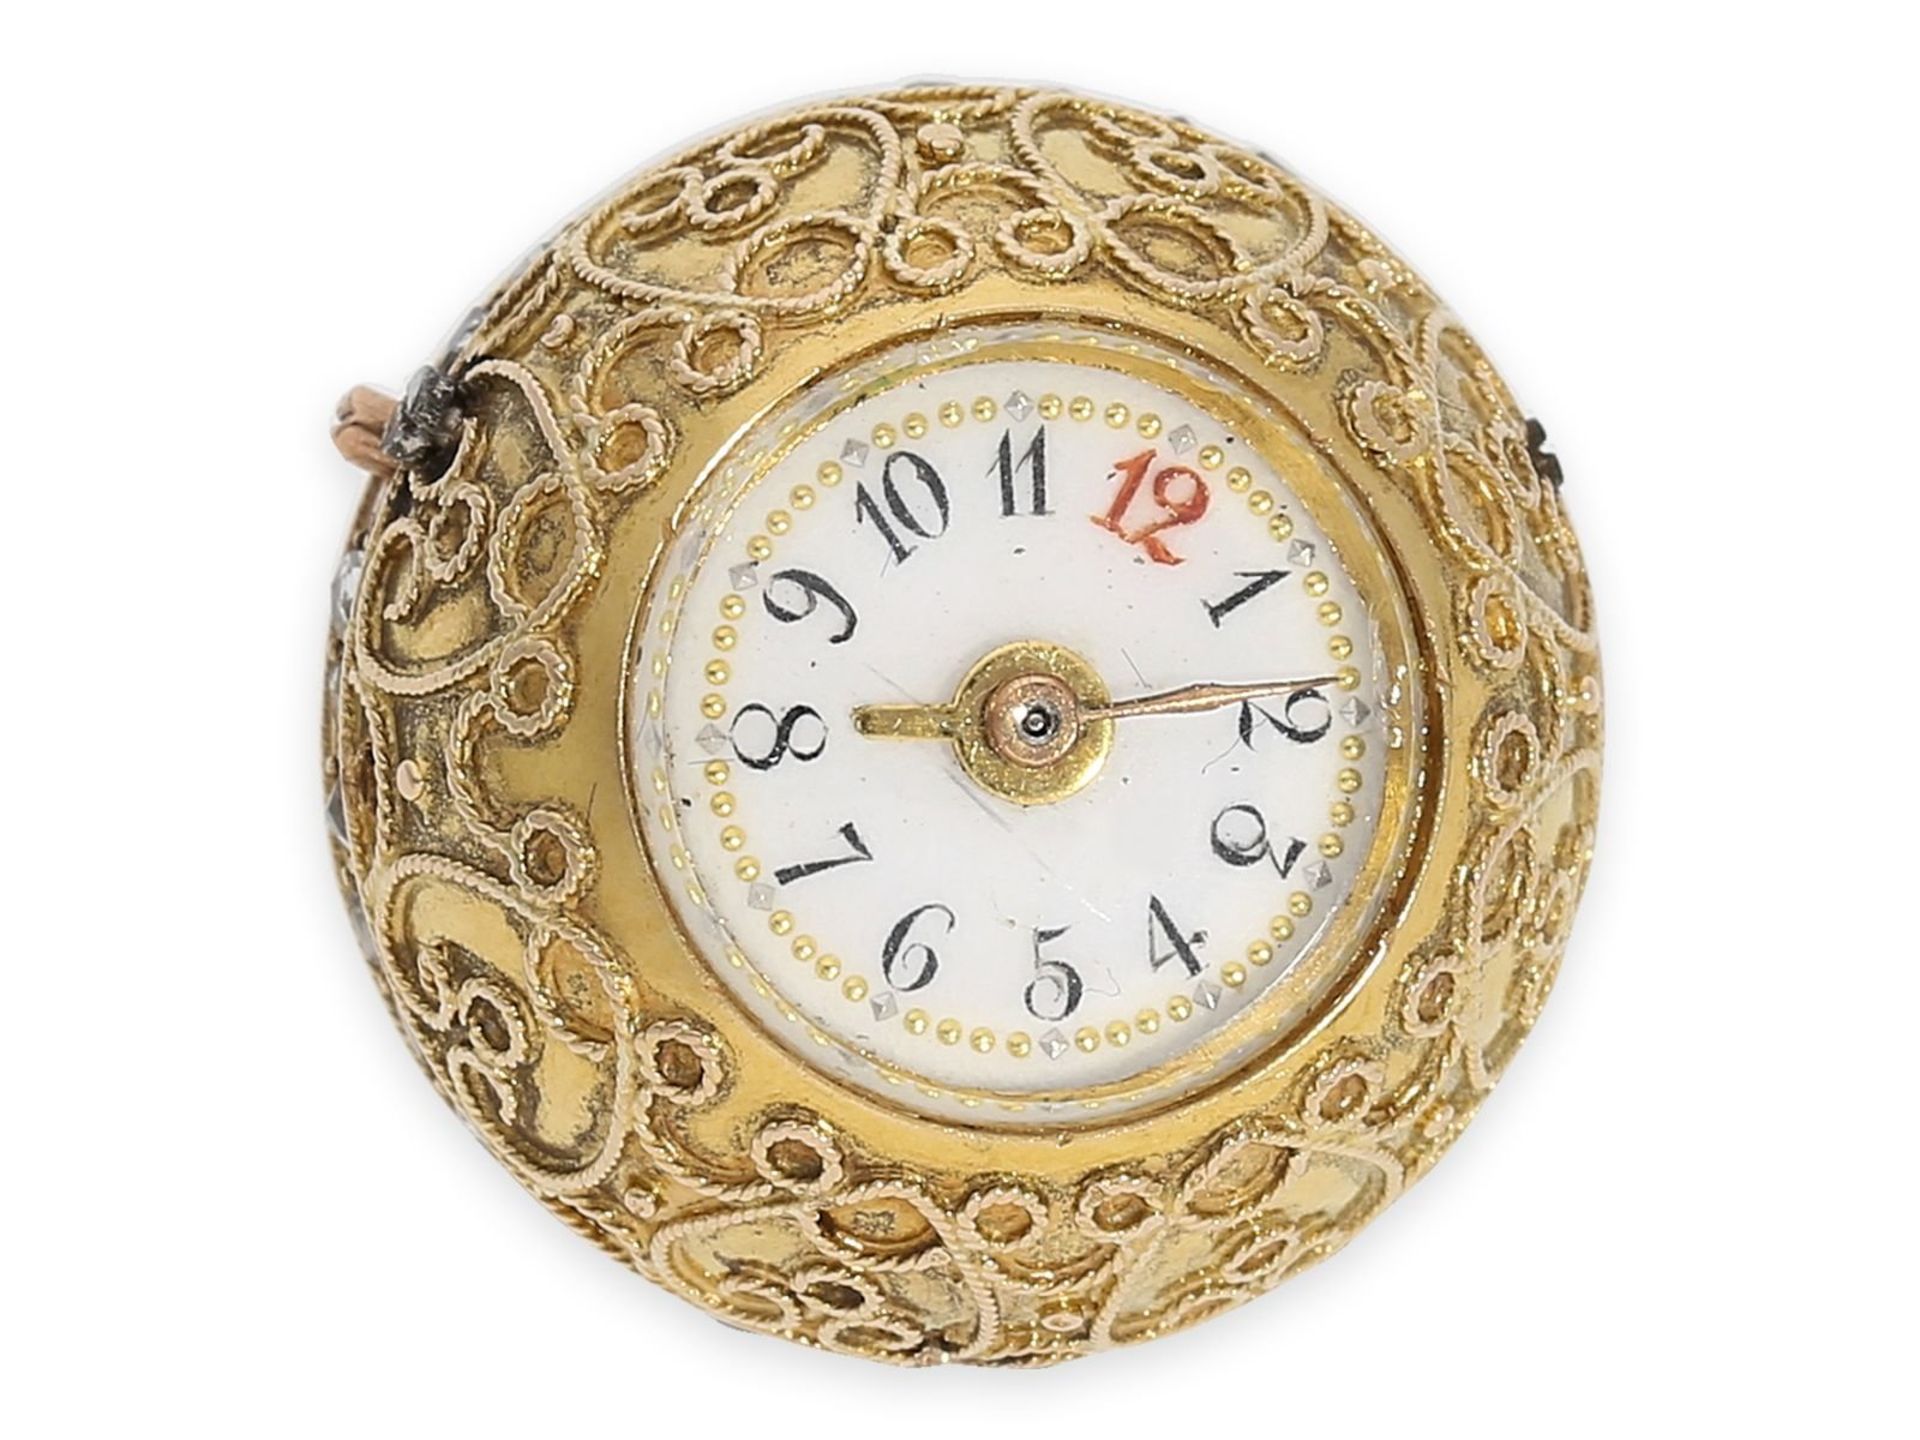 Form watch/ pendant watch: exquisite "Boule de Geneve" ball form watch with granulation and